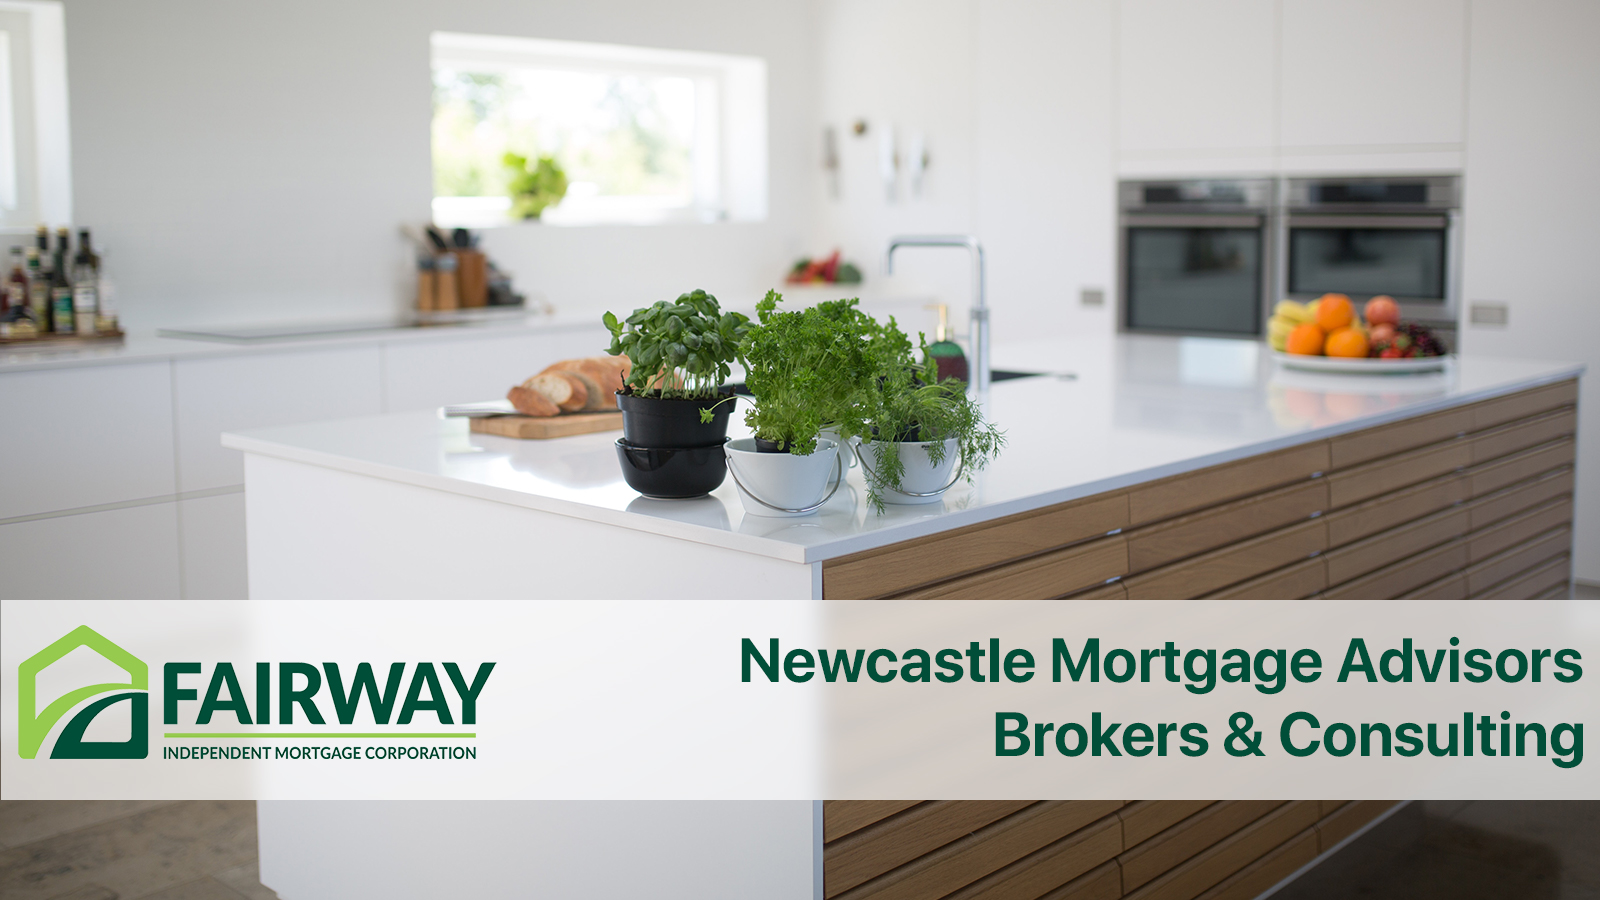 Newcastle-Mortgage-Advisors-Brokers-Consulting